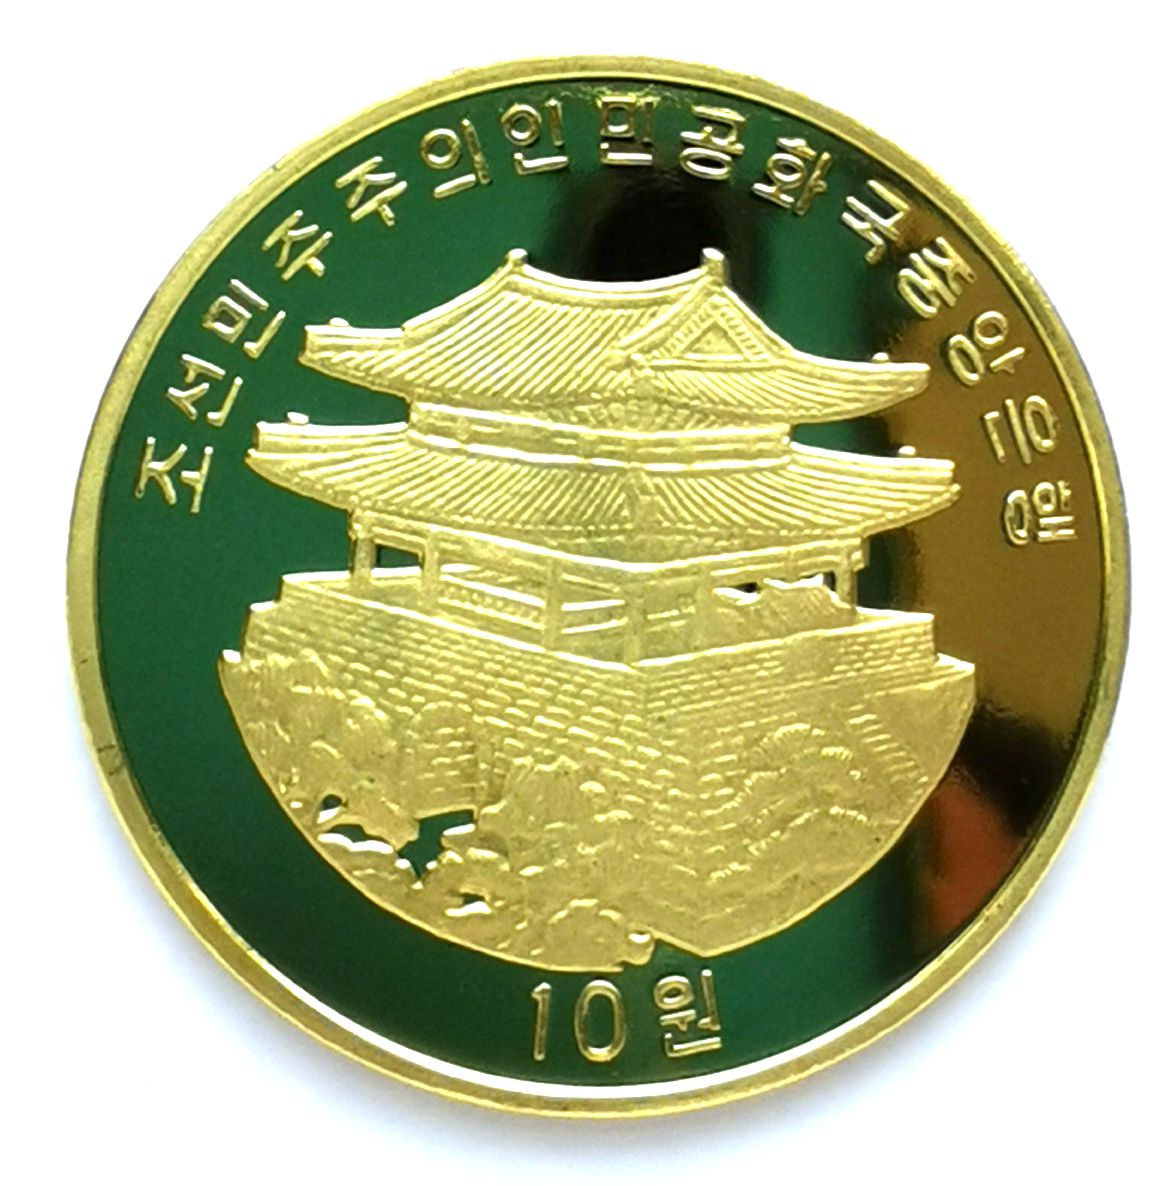 L3120, Korea "Chollima Movement" (1961) Coin, 10 Won, Issued in 2014 - Click Image to Close